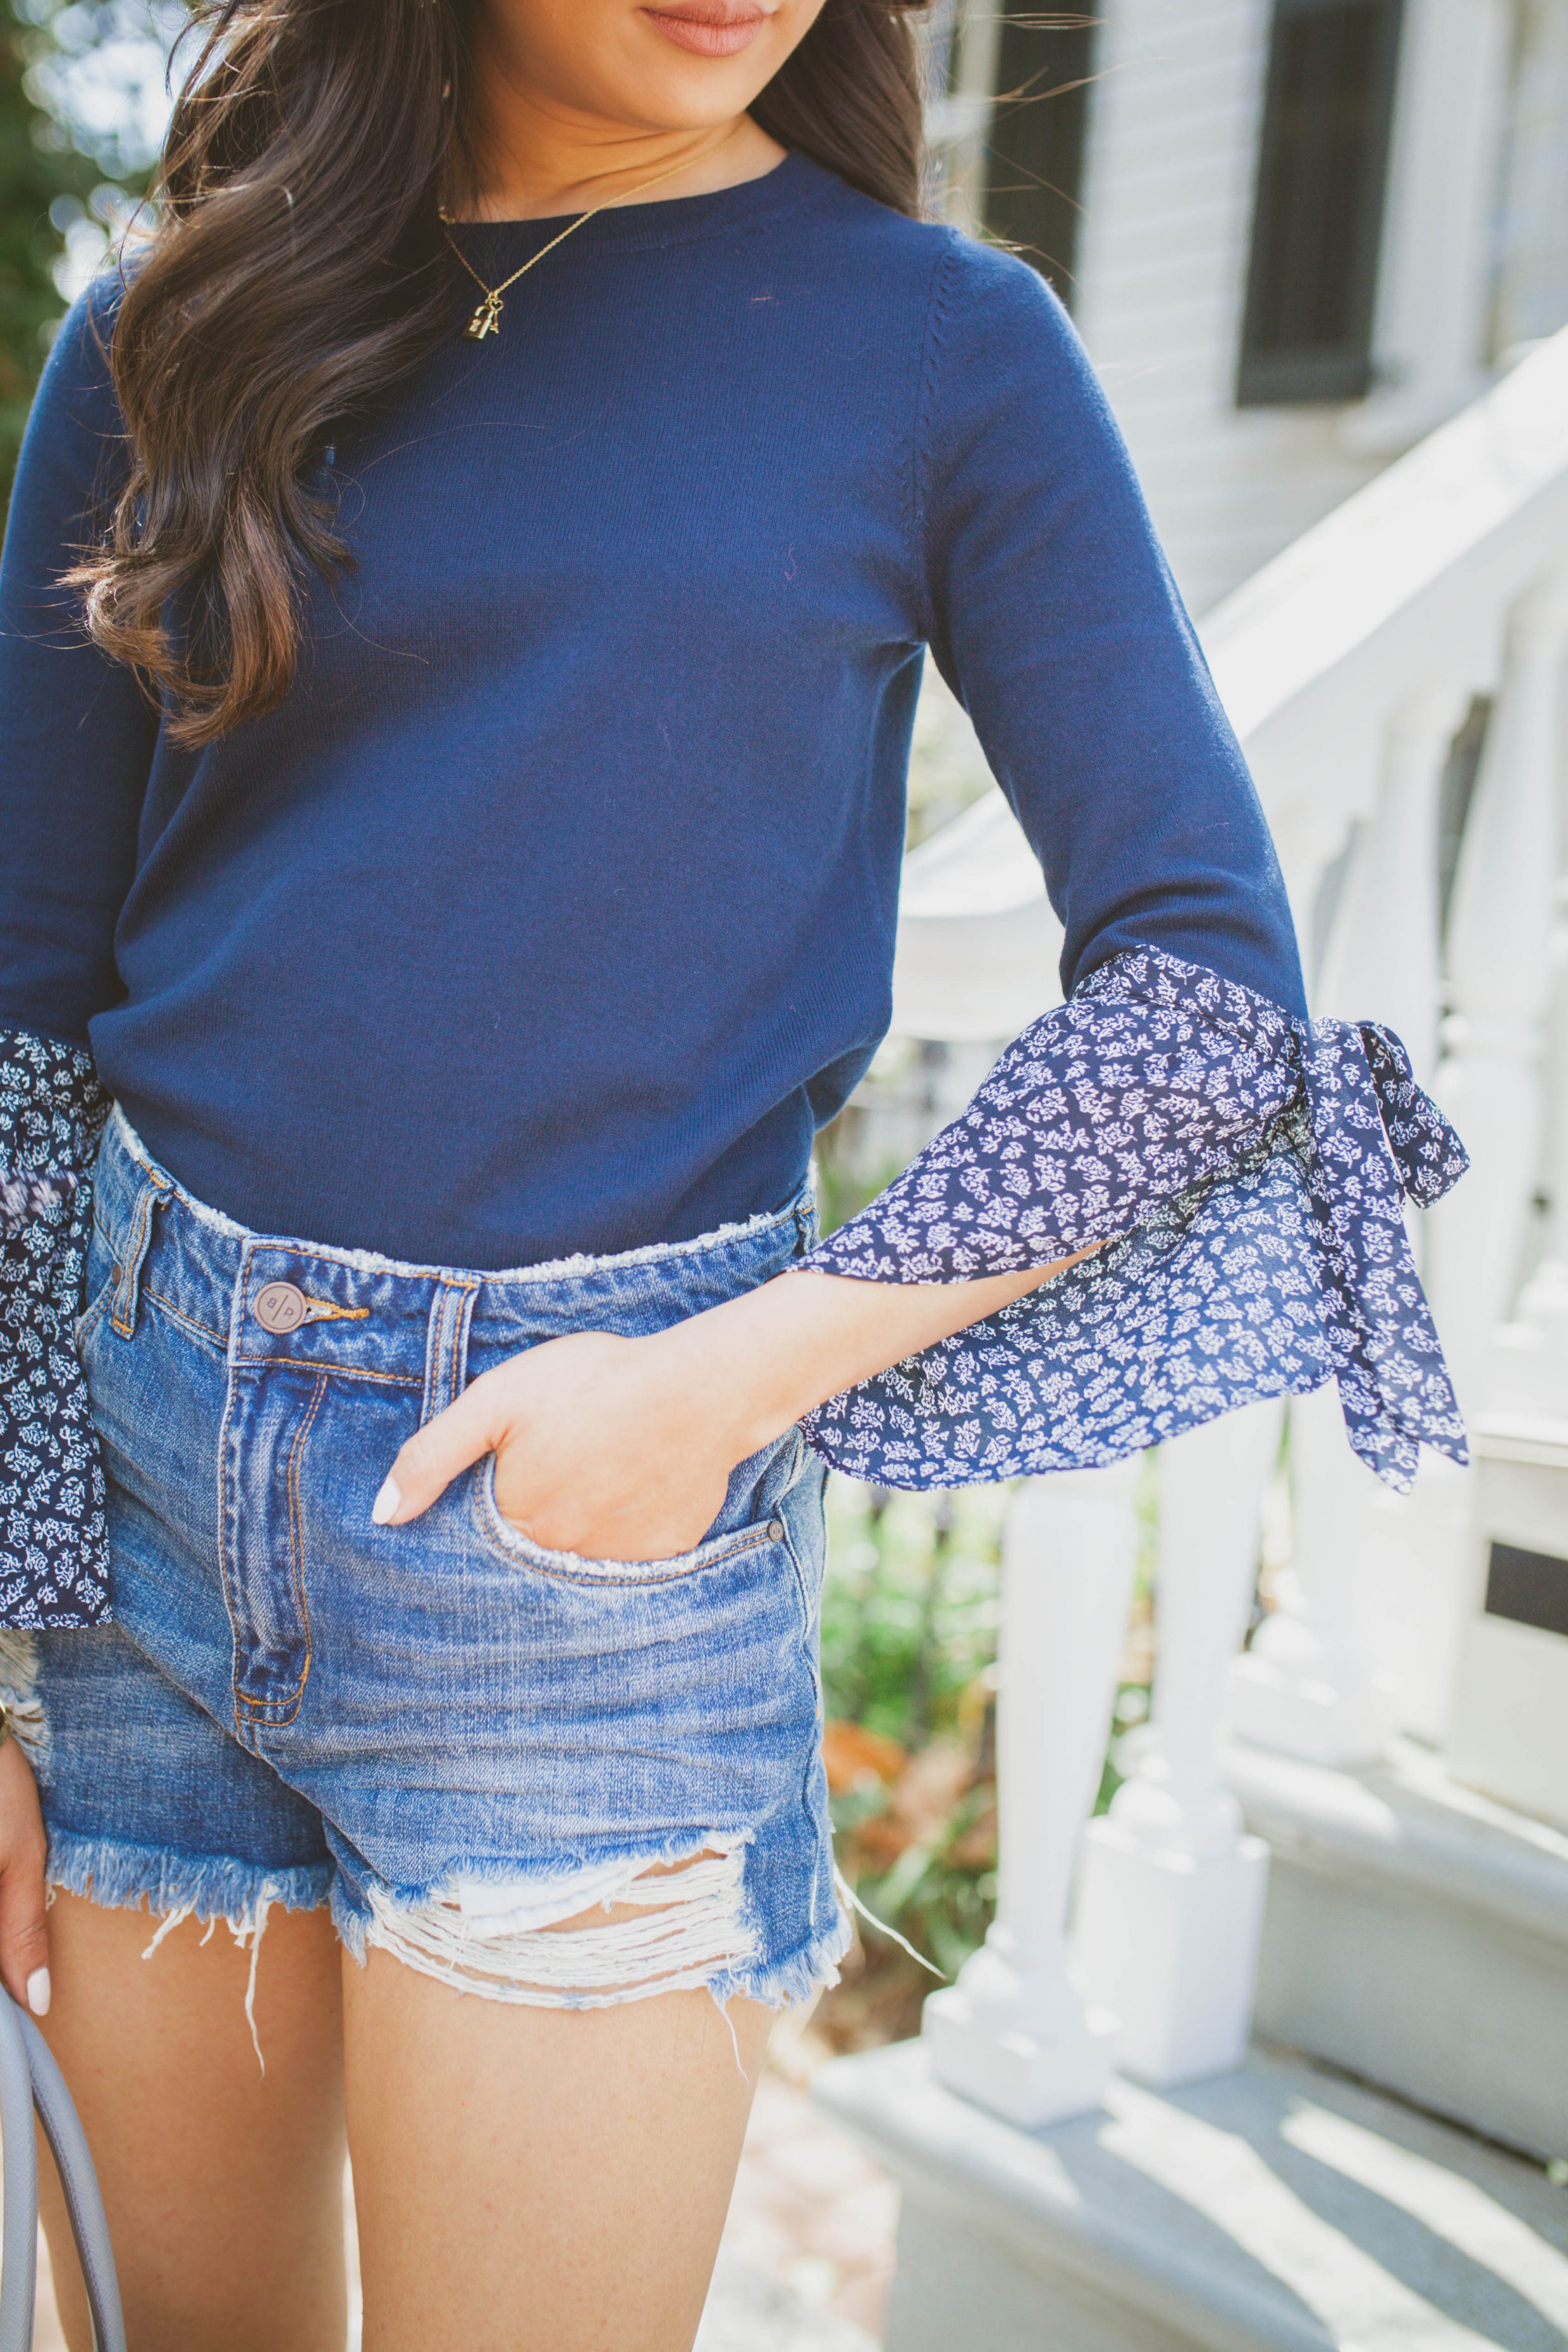 Hoang-Kim wears a navy floral tie-cuff sleeve top with distressed jeans for spring